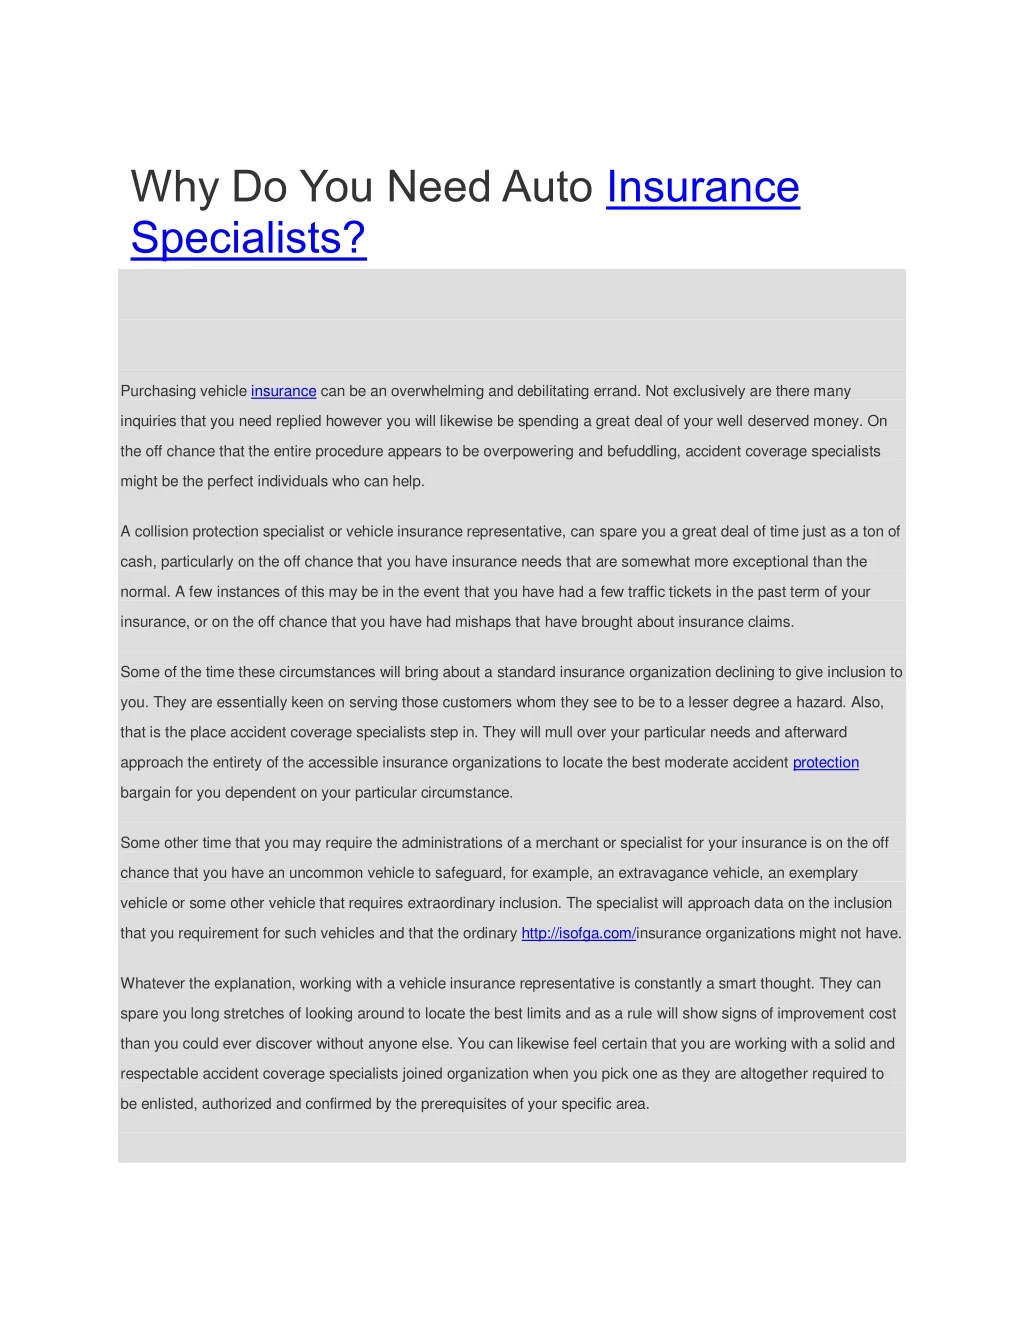 why do you need auto insurance specialists